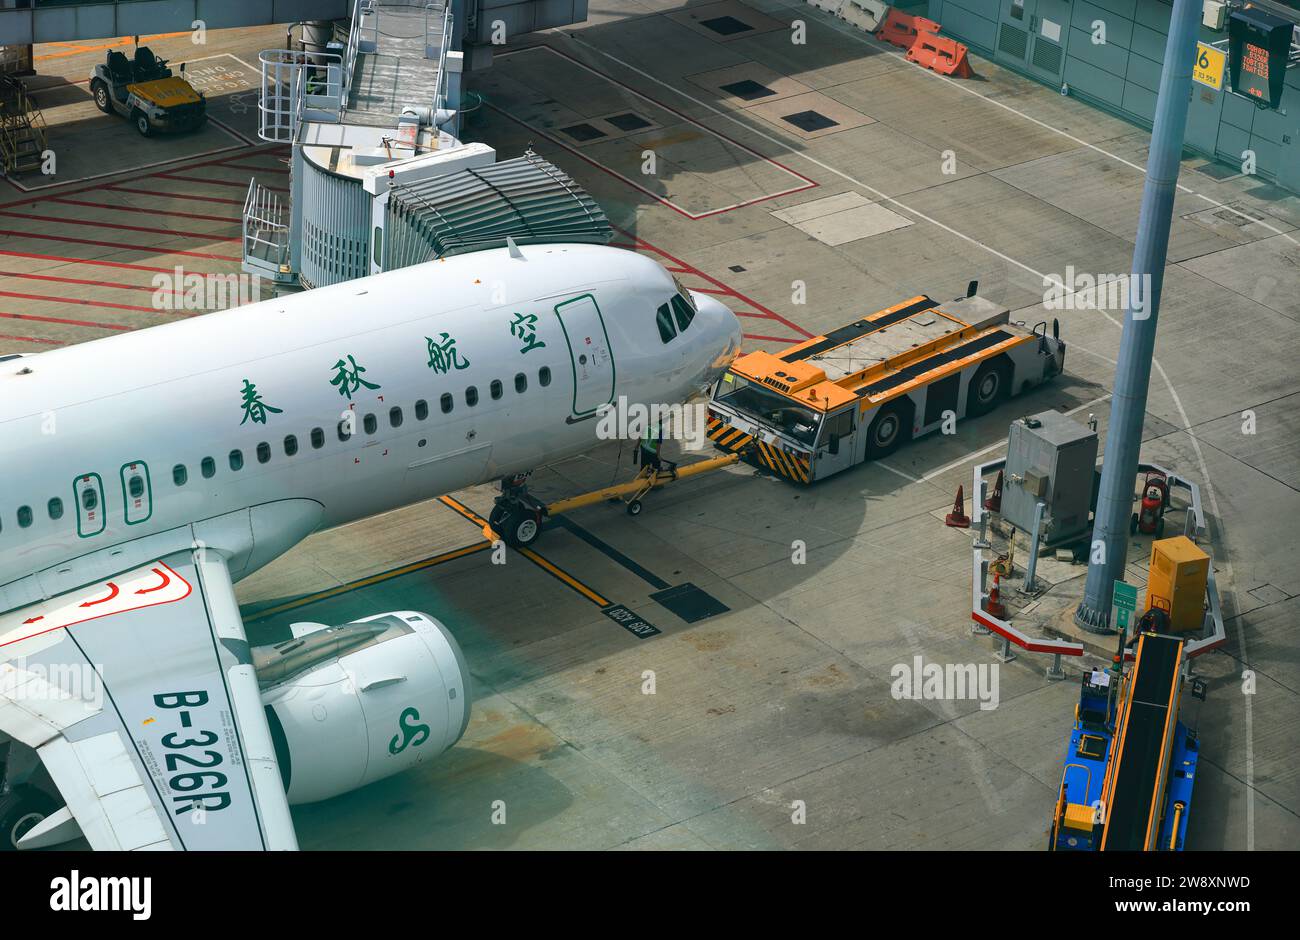 Airplane Tugs, Machine for push back the aircraft to taxiway in ground handling services at Hong Kong International Airport, Hong Kong. Stock Photo